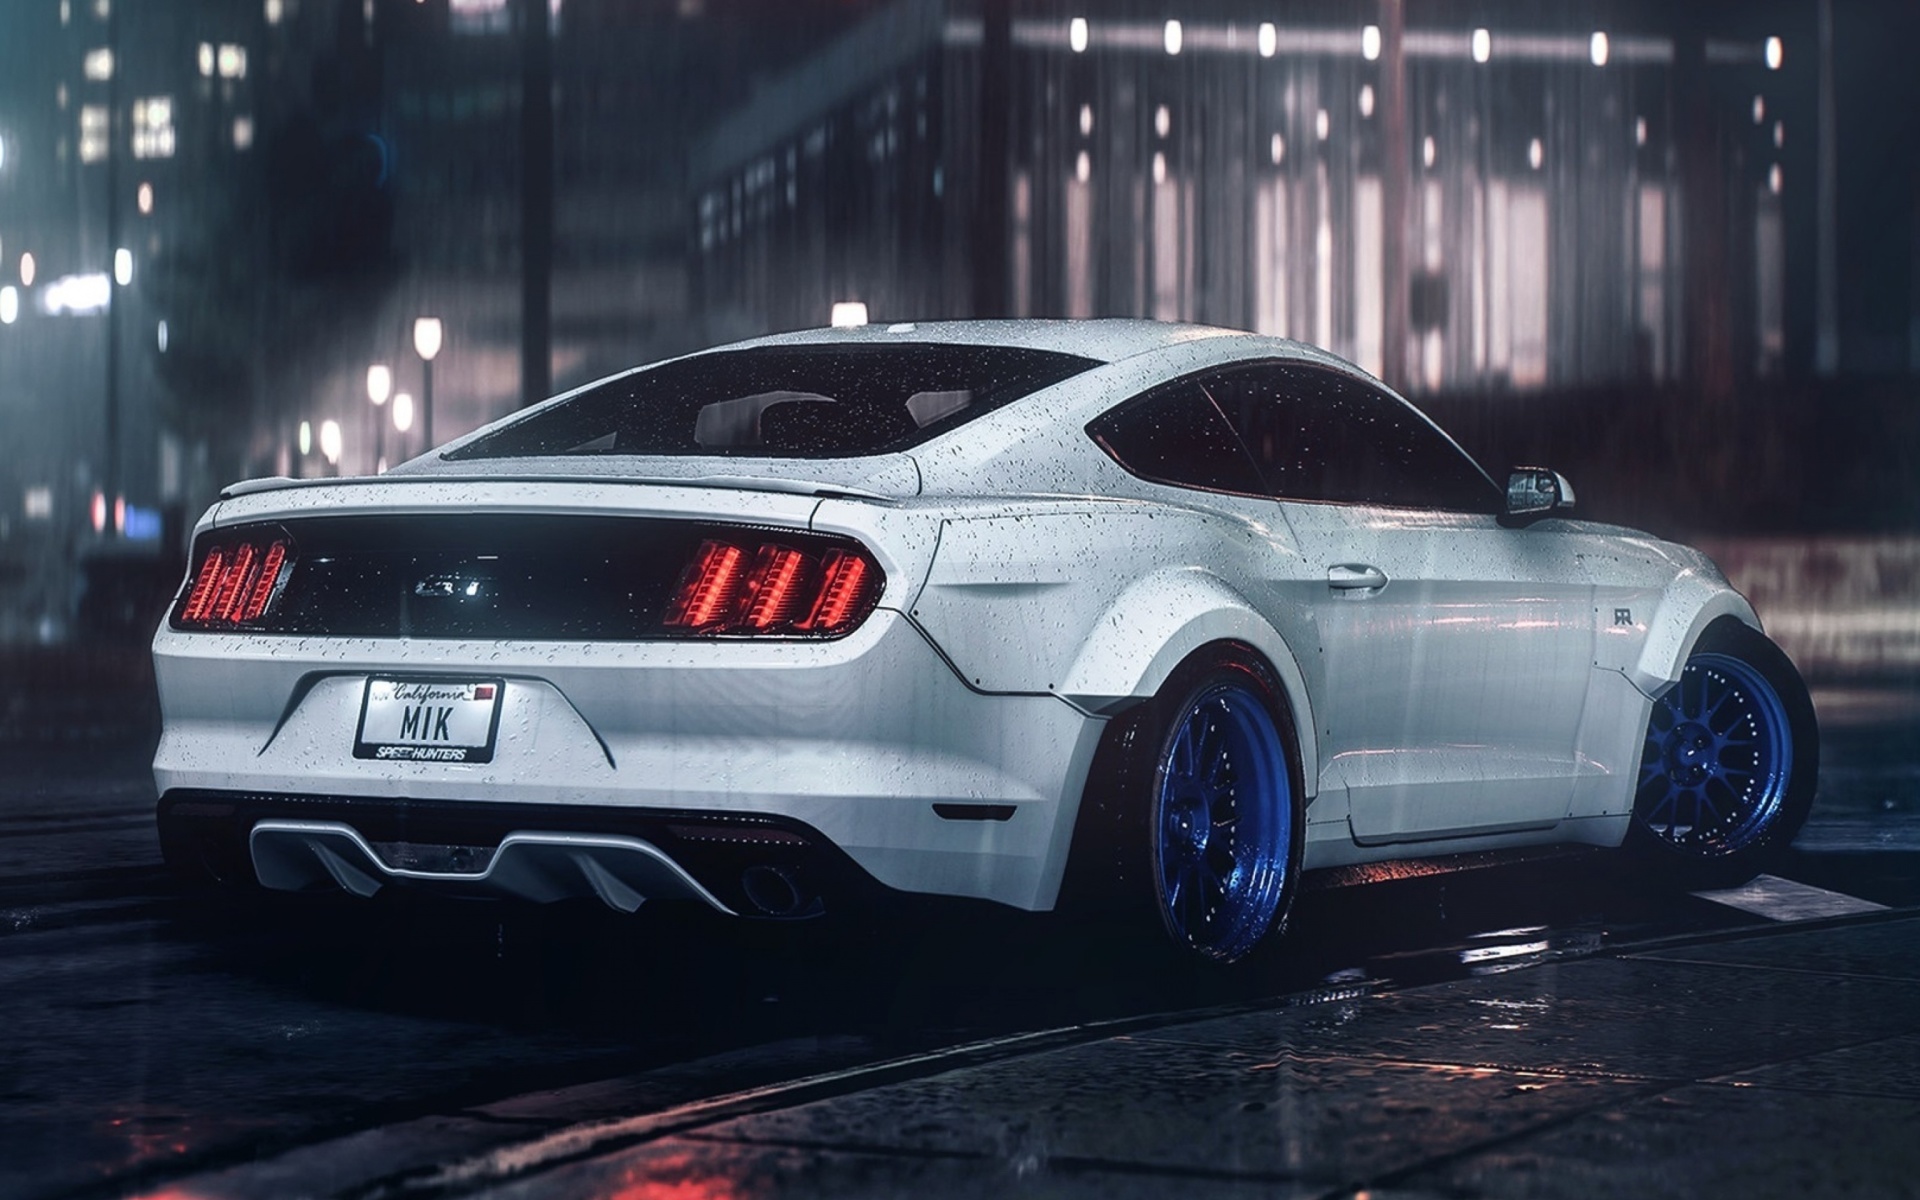 Ford Mustang Shelby GT350 wallpaper 1920x1200